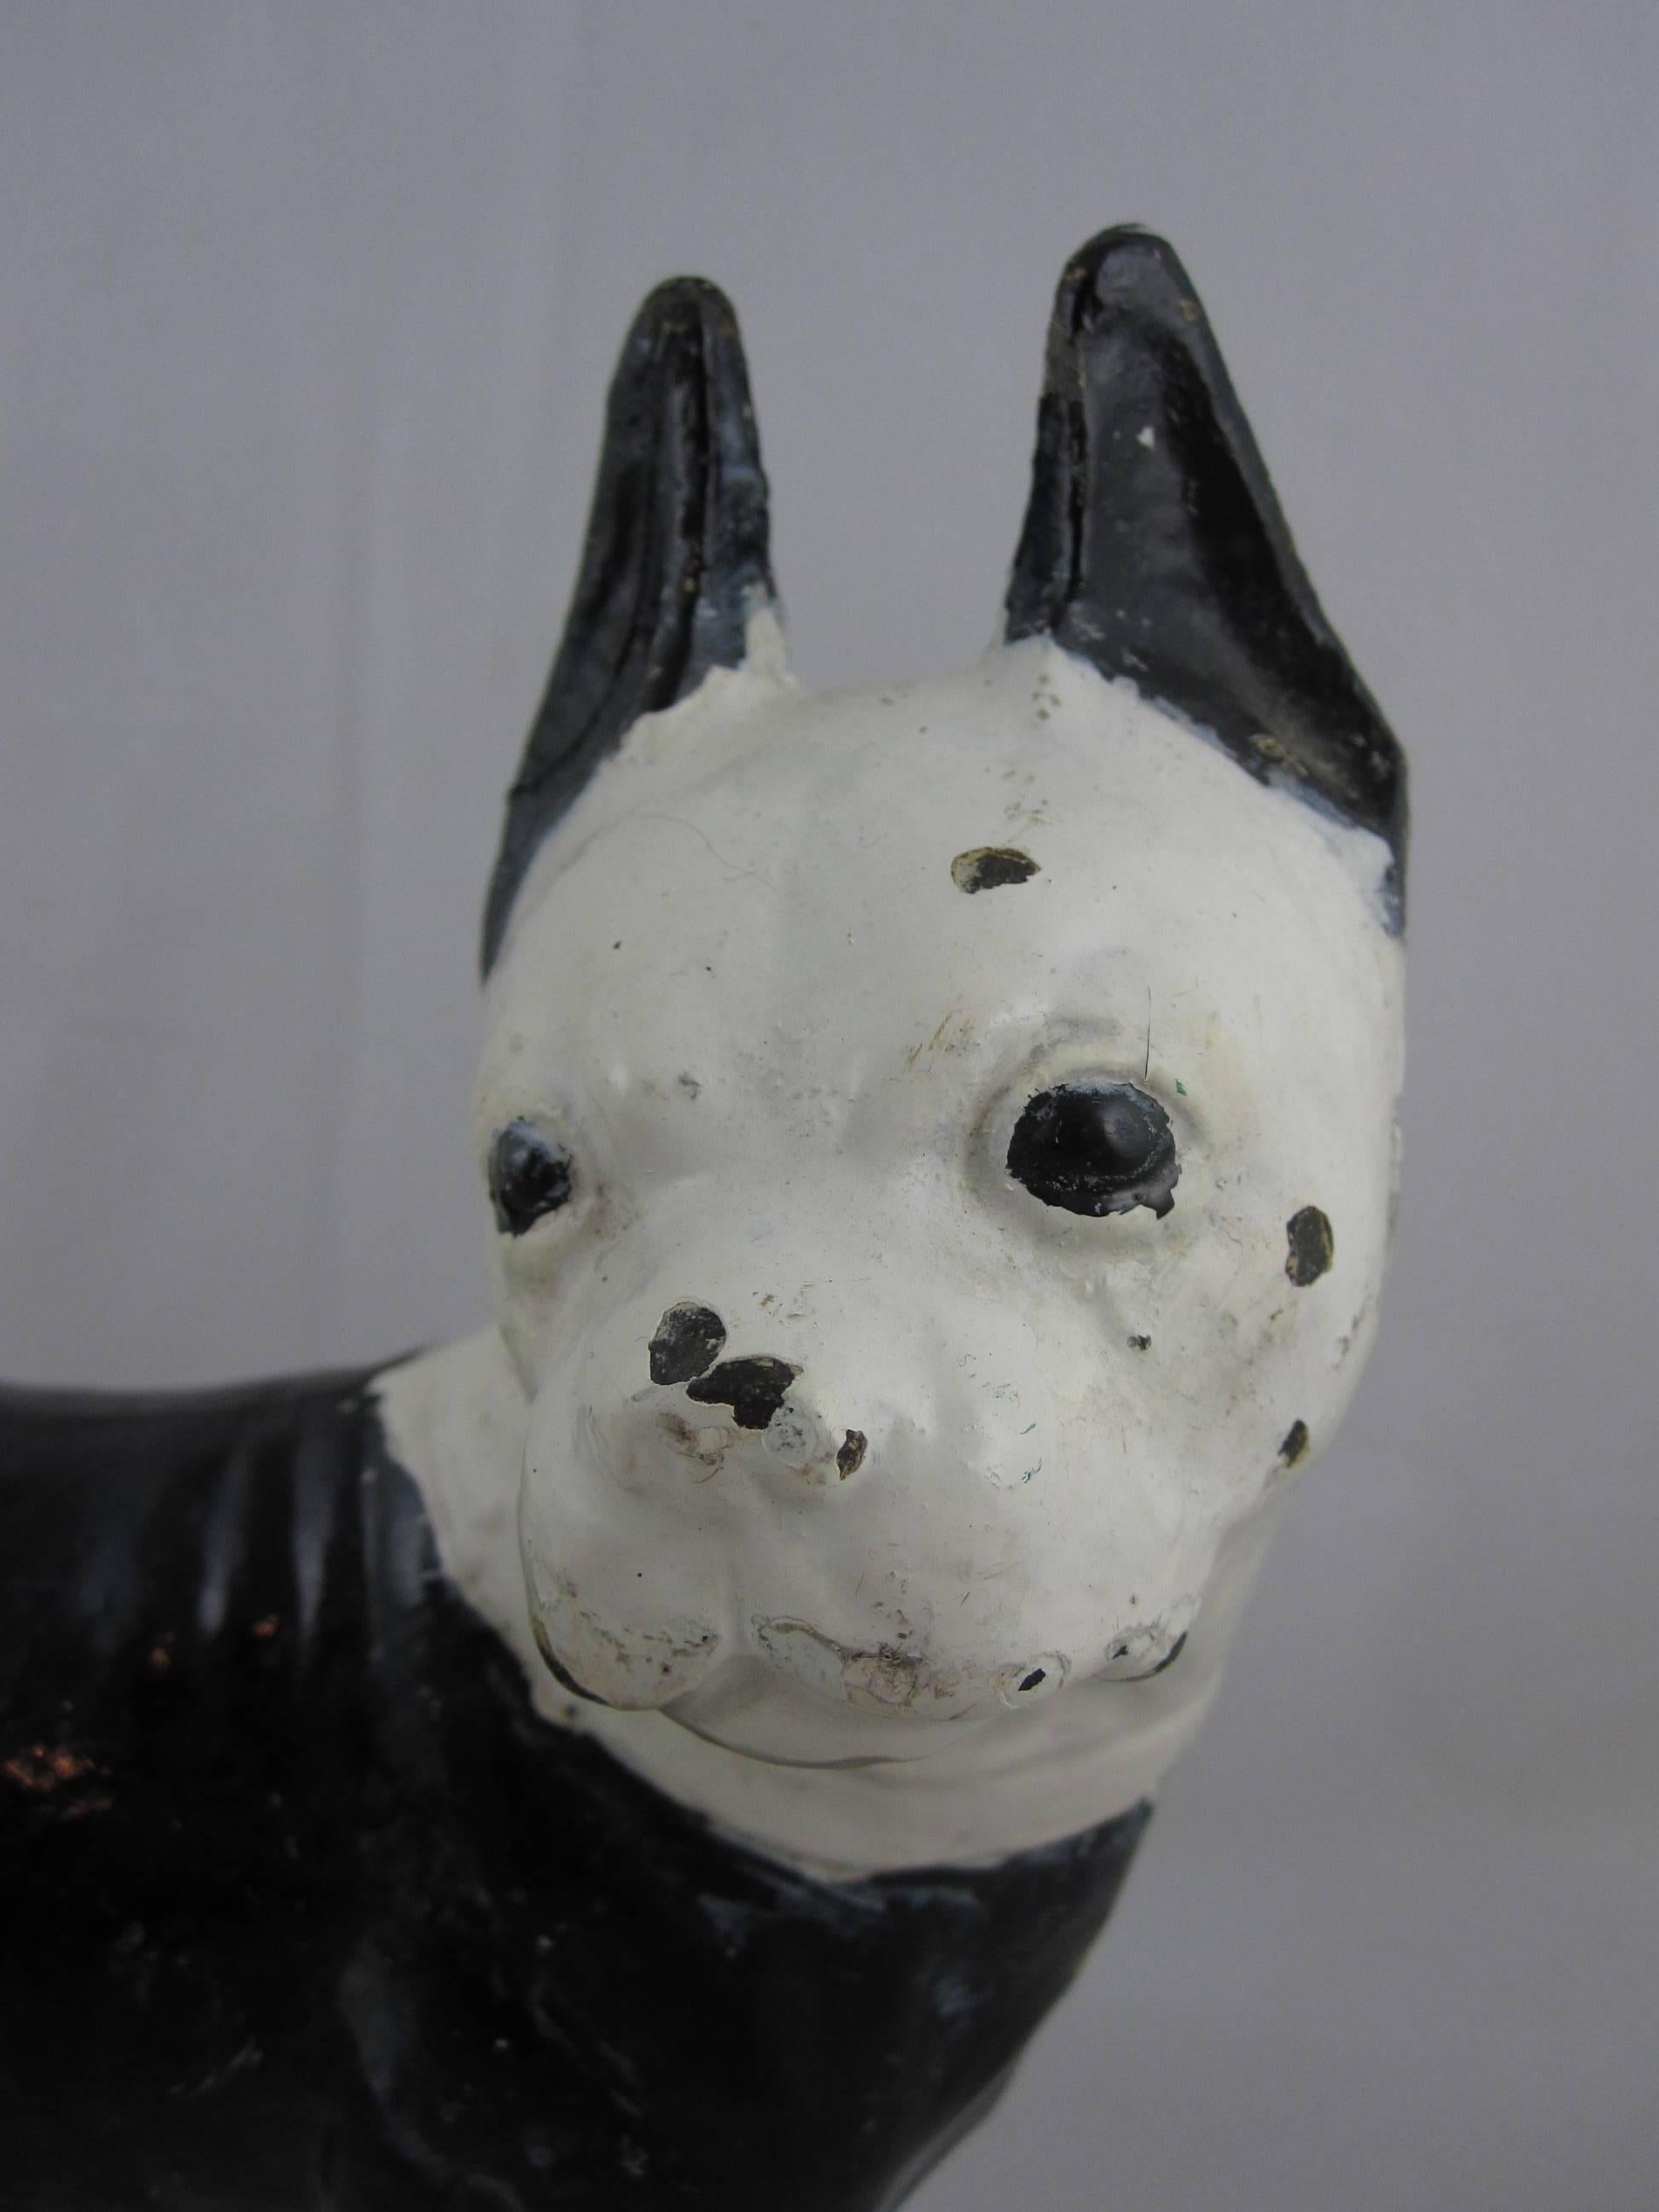 A Hubley cast iron doorstop, a French bulldog, enameled in black and white, circa early 1900s. This form shows the true to breed stance and the great expression Hubley dogs are known for. The Hubley Manufacturing Company was first incorporated in